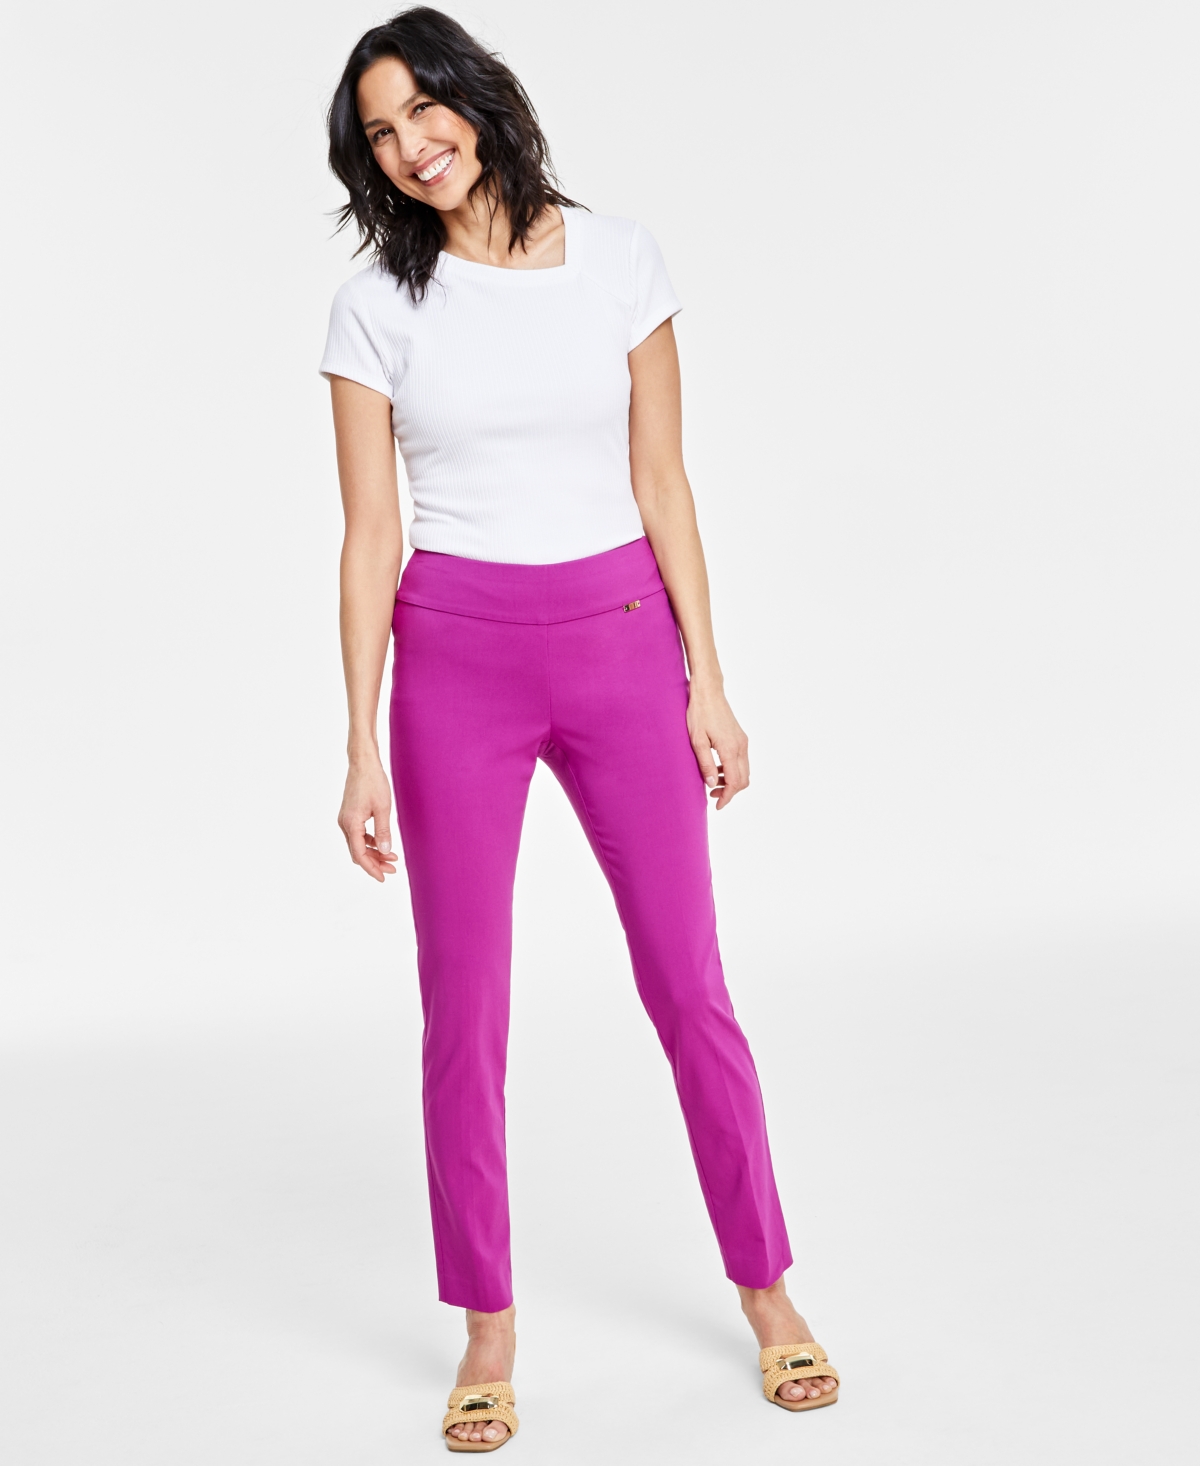 Mid-Rise Petite Tummy-Control Skinny Pants, Petite & Petite Short, Created for Macy's - Violet Orchid